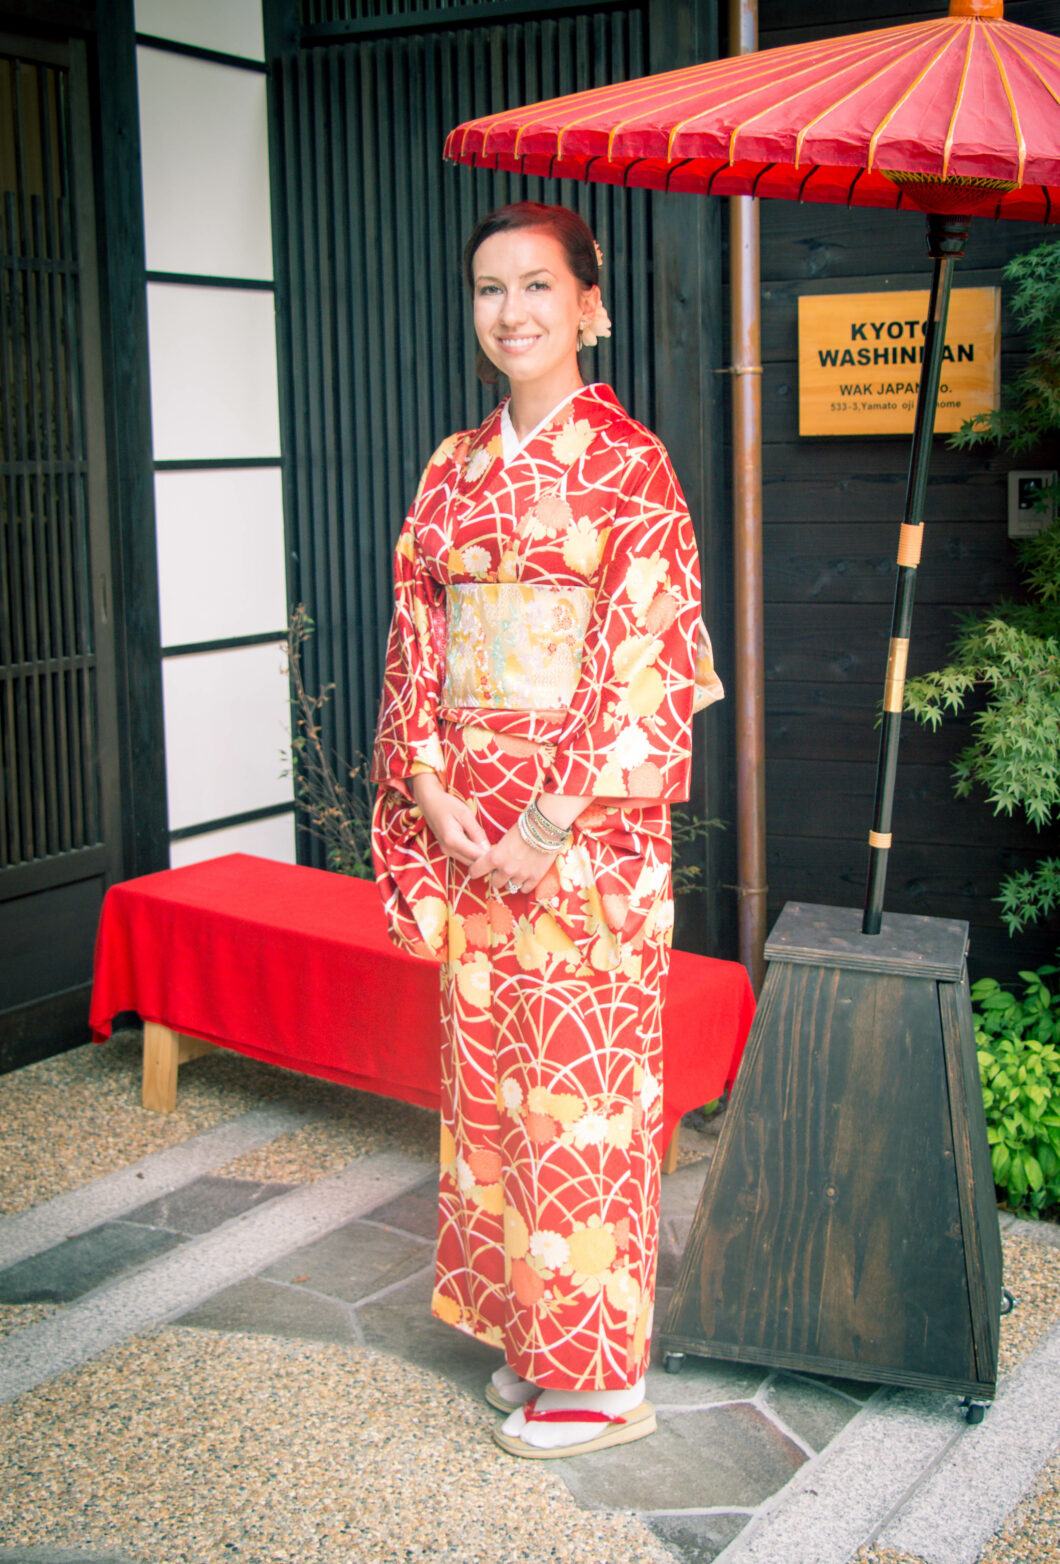 Wearing a Kimono in Japan for a Traditional Tea Ceremony